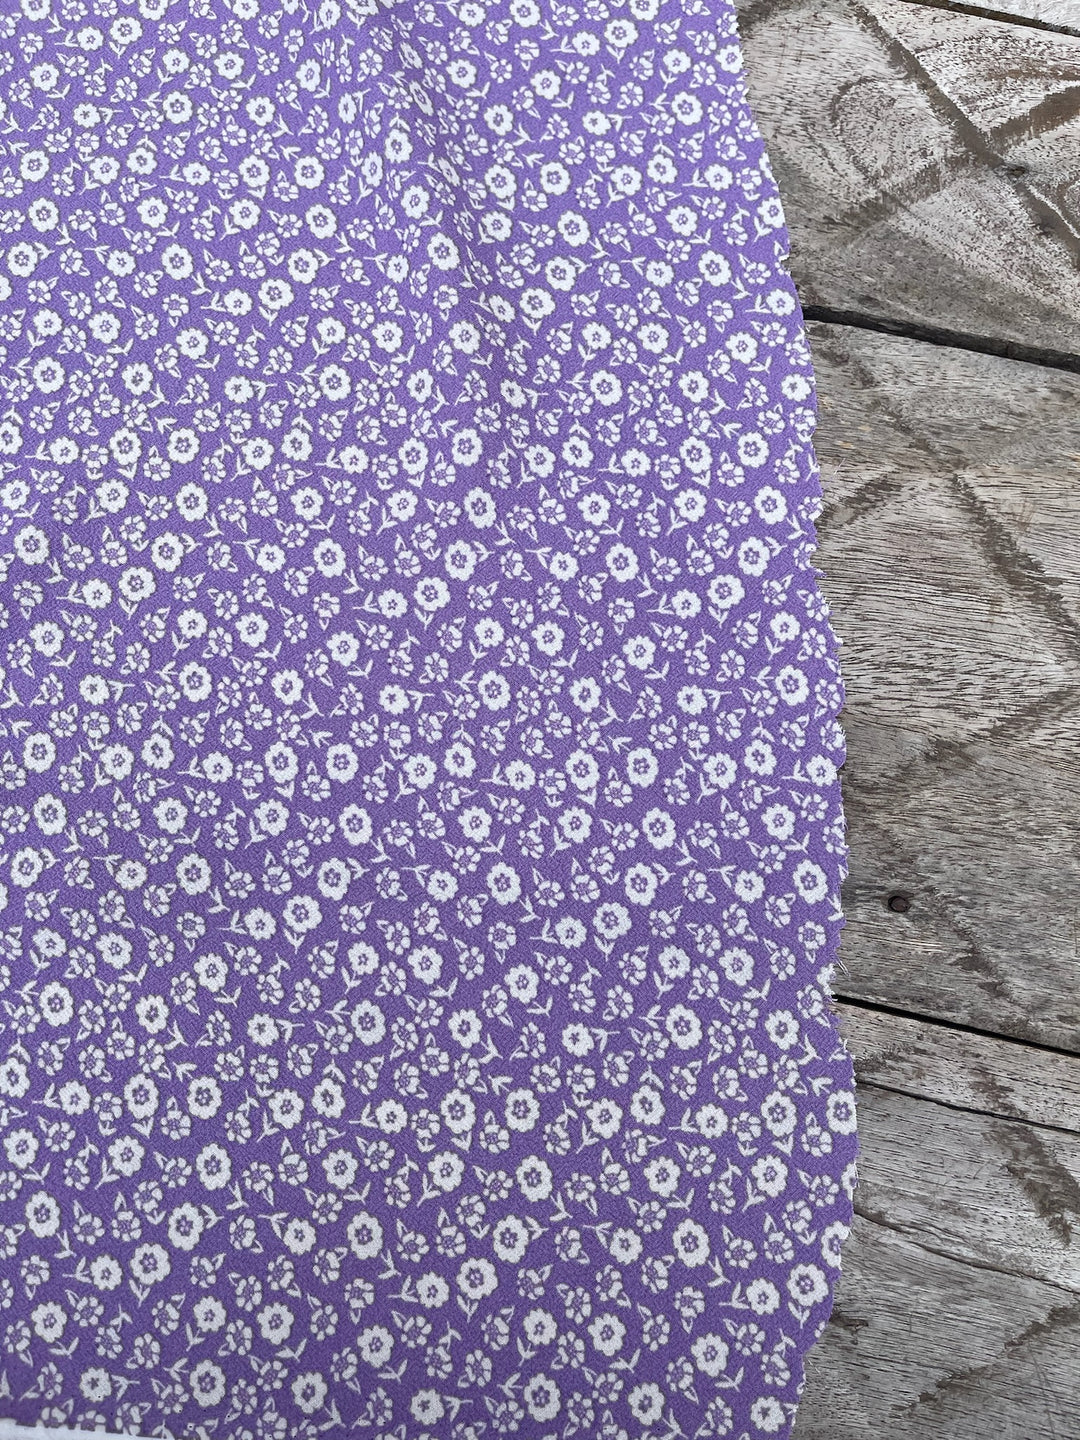 Wooldobby  fabric by the yard - Lavender dainty floral print